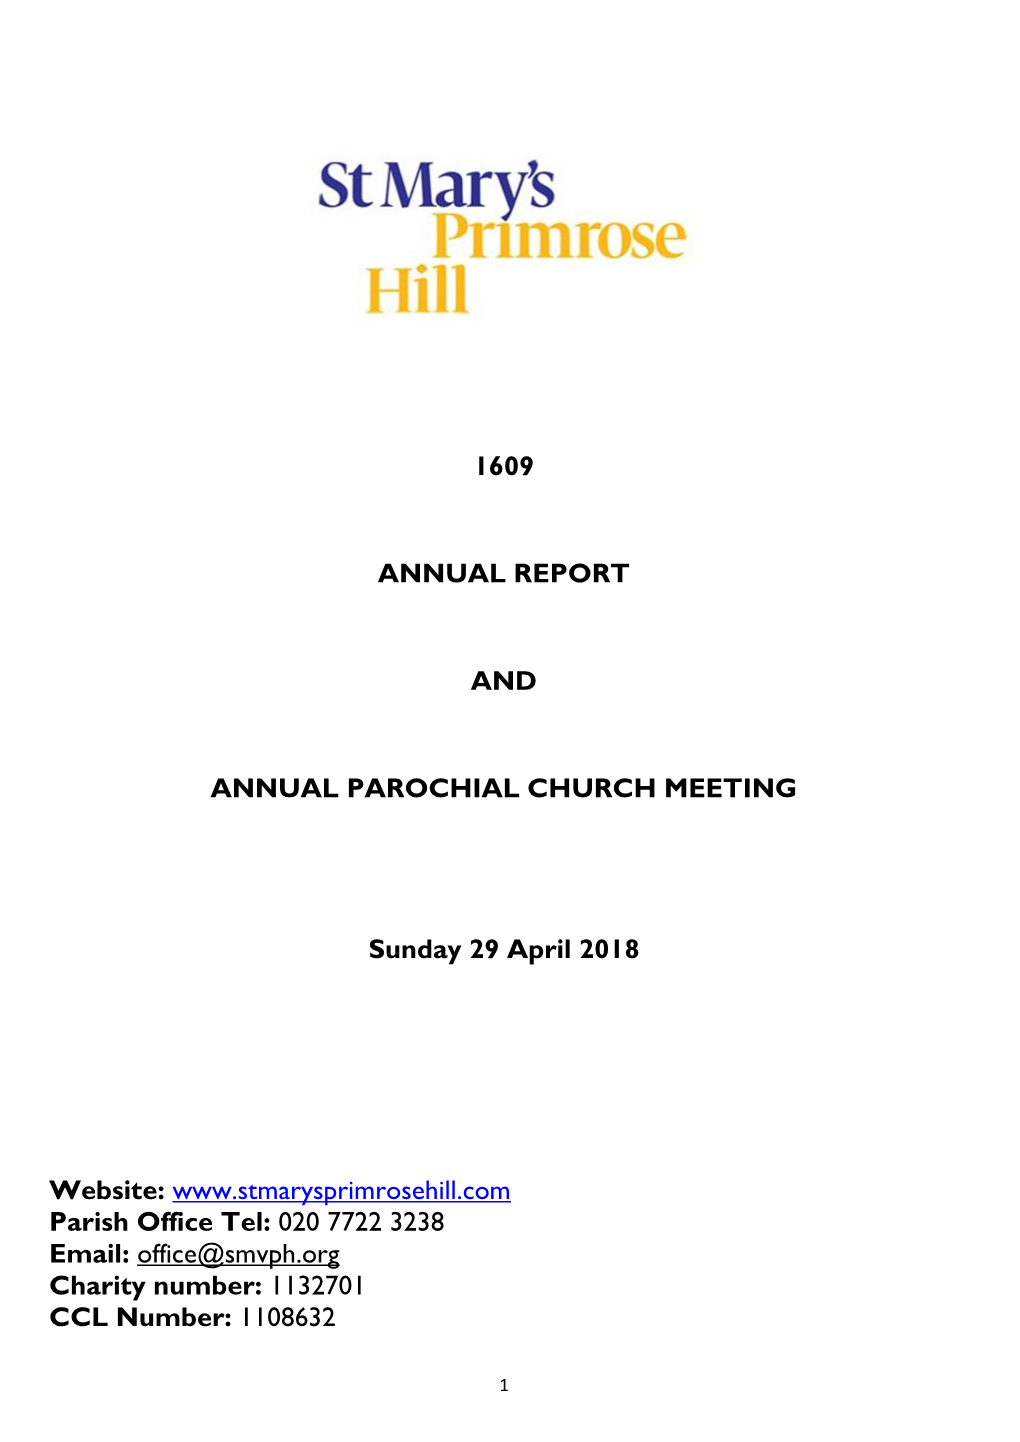 1609 Annual Report and Annual